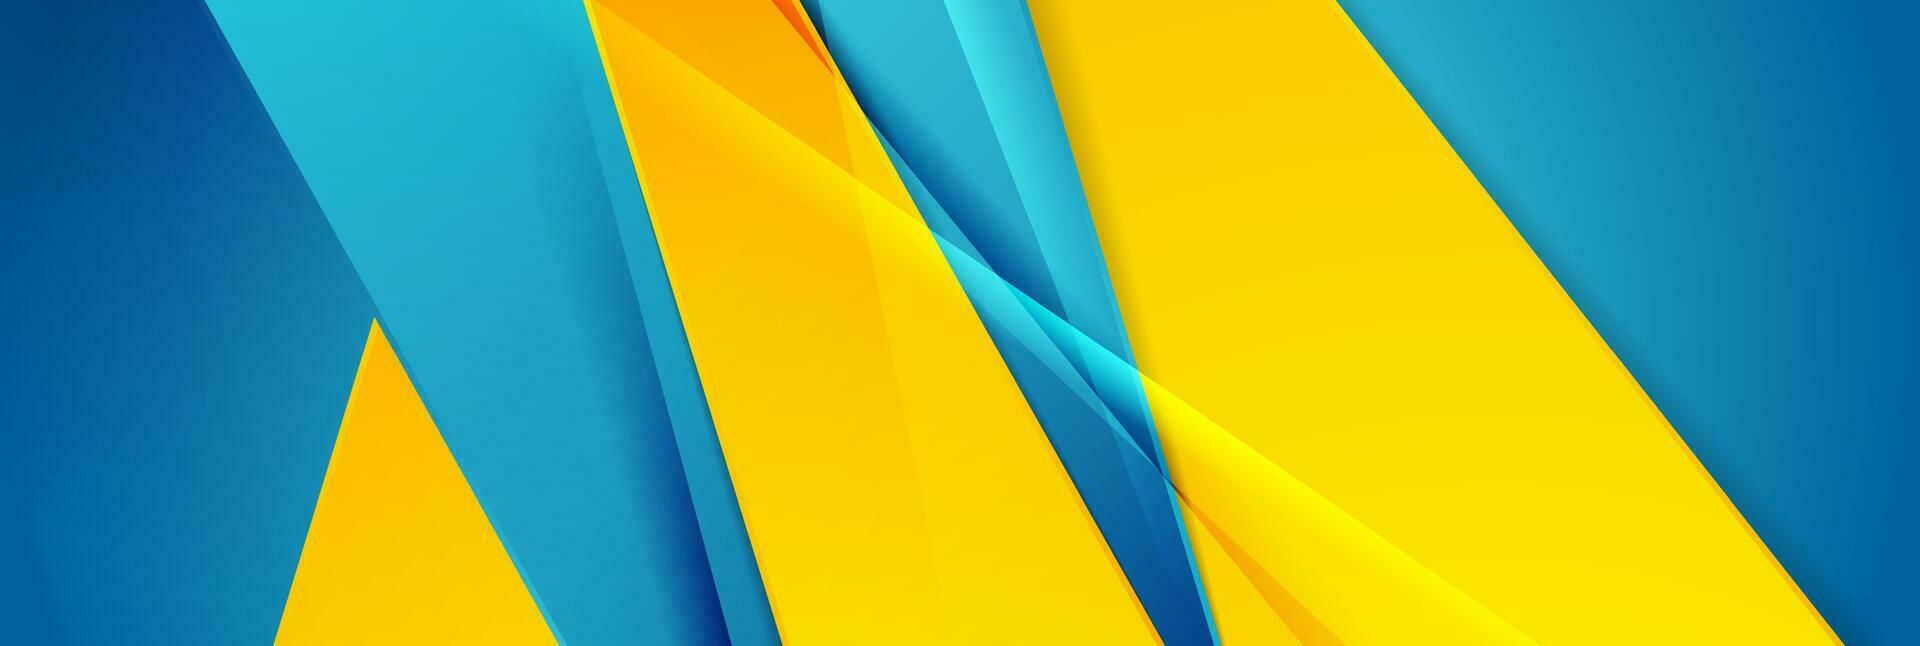 Bright yellow and blue glossy stripes abstract background vector